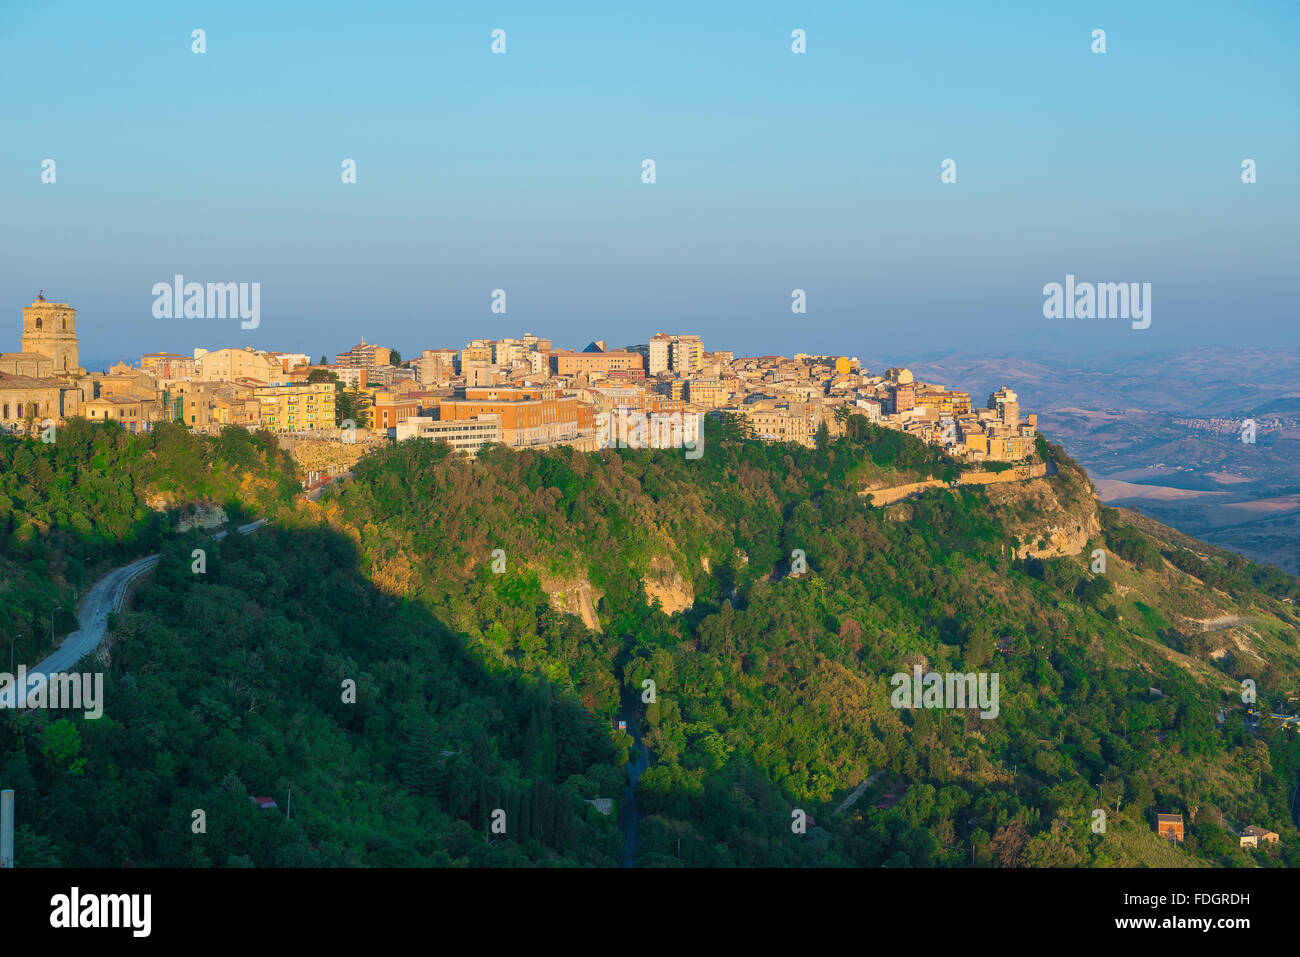 Sicily landscape, view of sunrise over the historic city of Enna, sited at the centre of the island of Sicily. Stock Photo